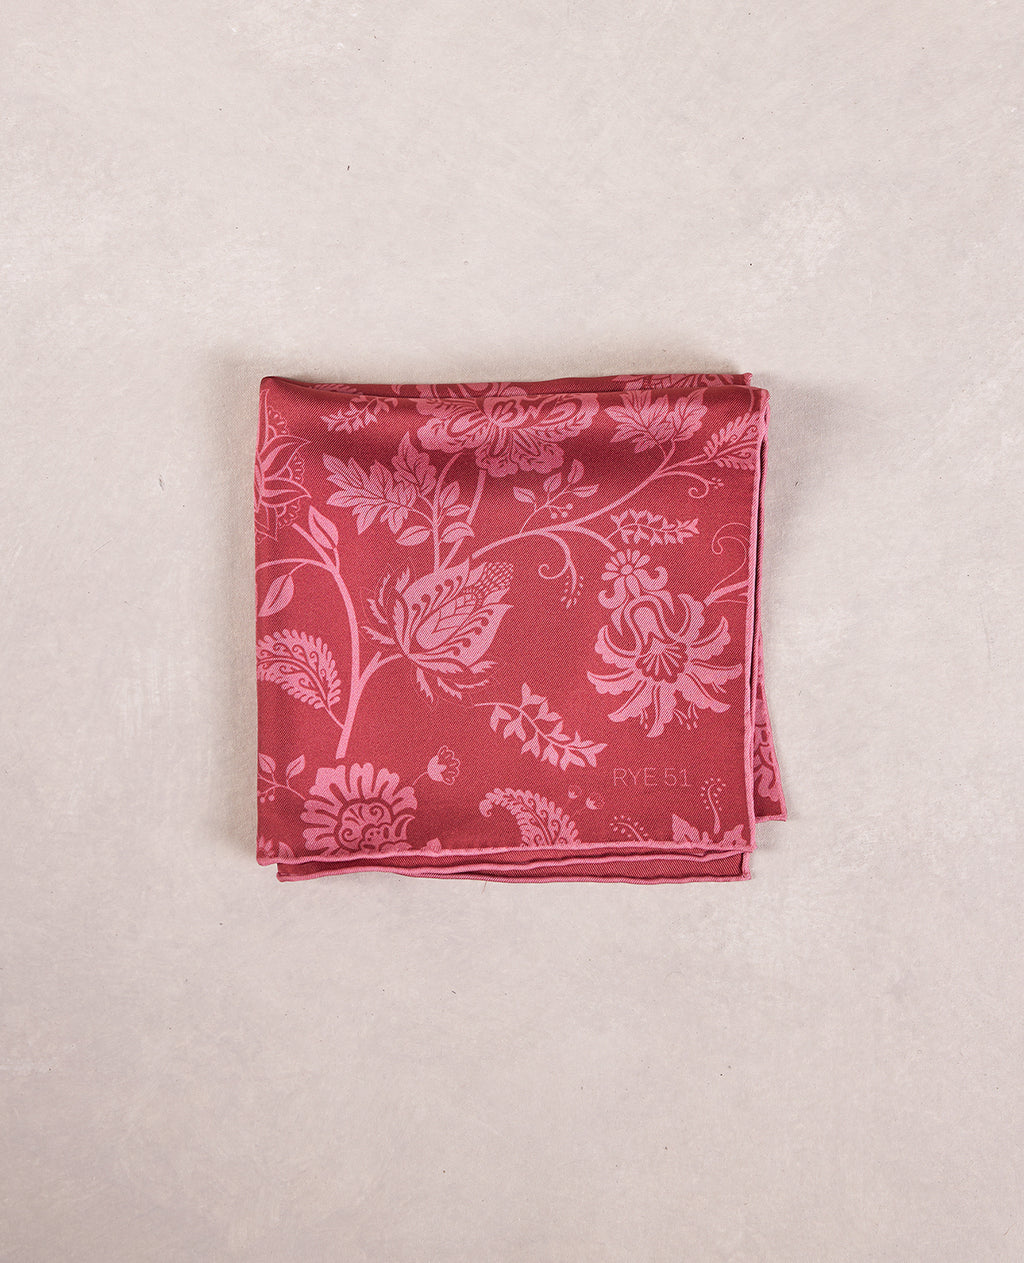 The Silk Pocket Square - Double Face - 100% Silk Pocket Square - Red Solid / Floral